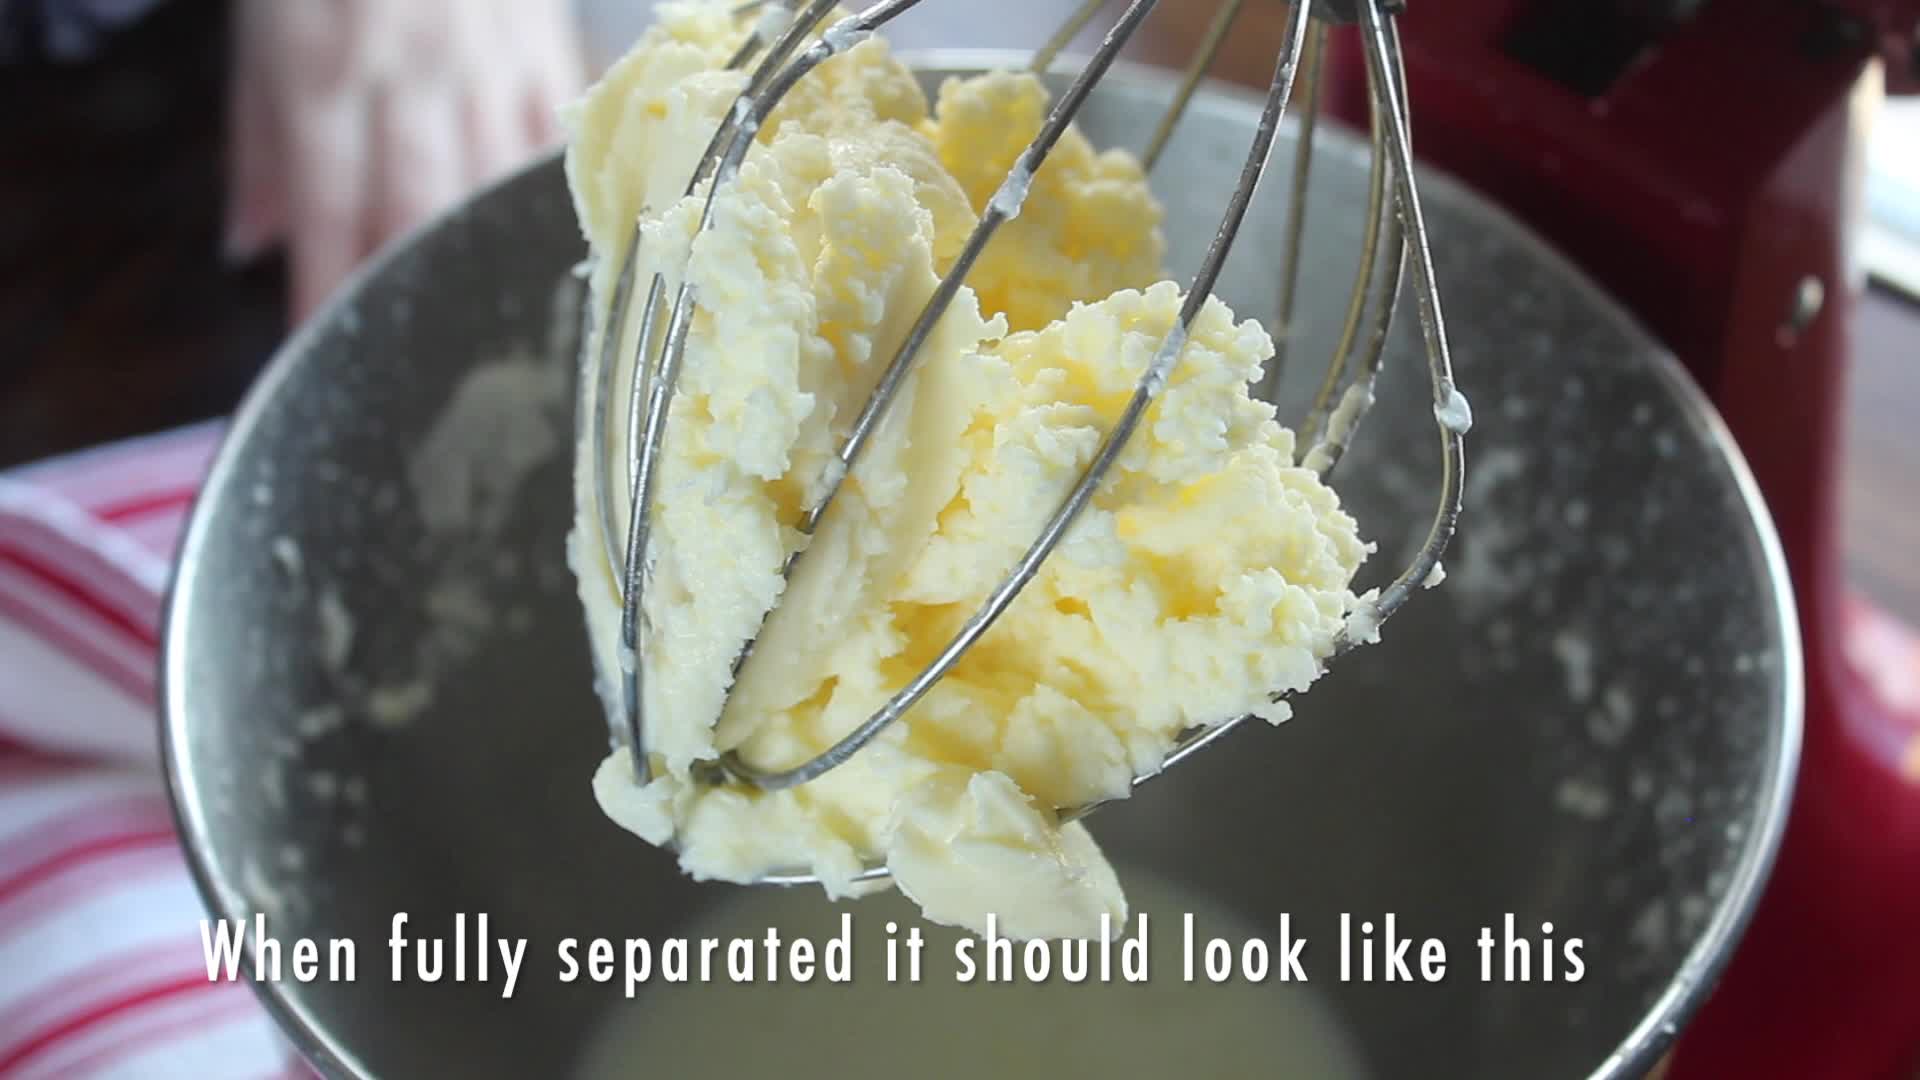 How to Make Homemade Butter with KitchenAid Mixer